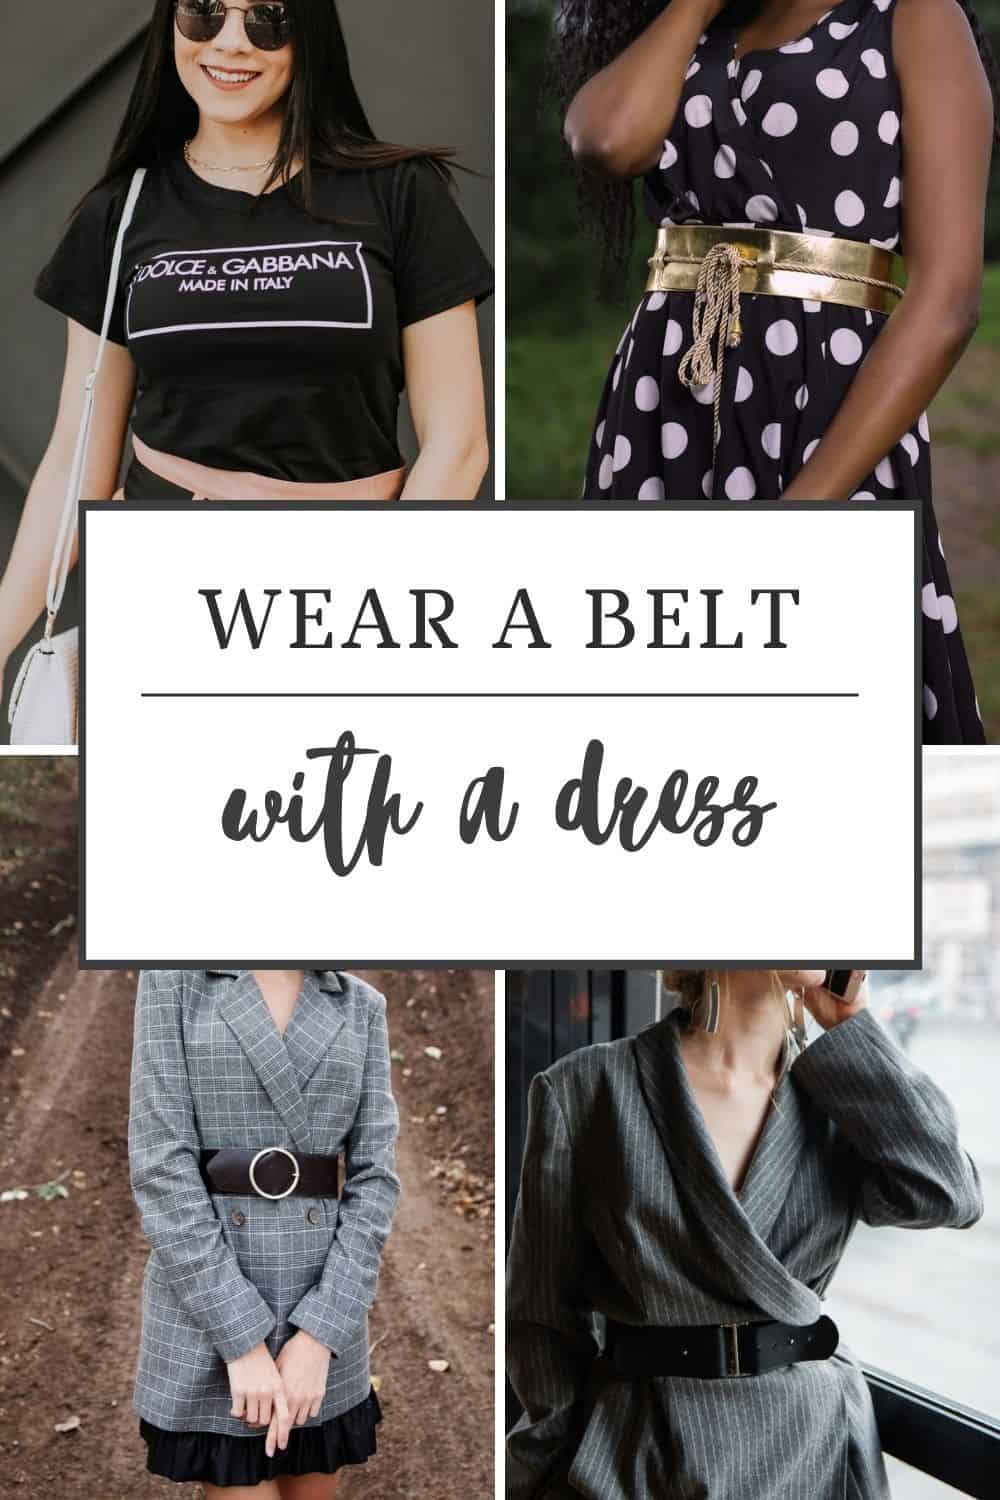 Wondering how to wear a belt with a dress? What are the best ways to tie and wrap them around your waist? Check out these tips for the answers.